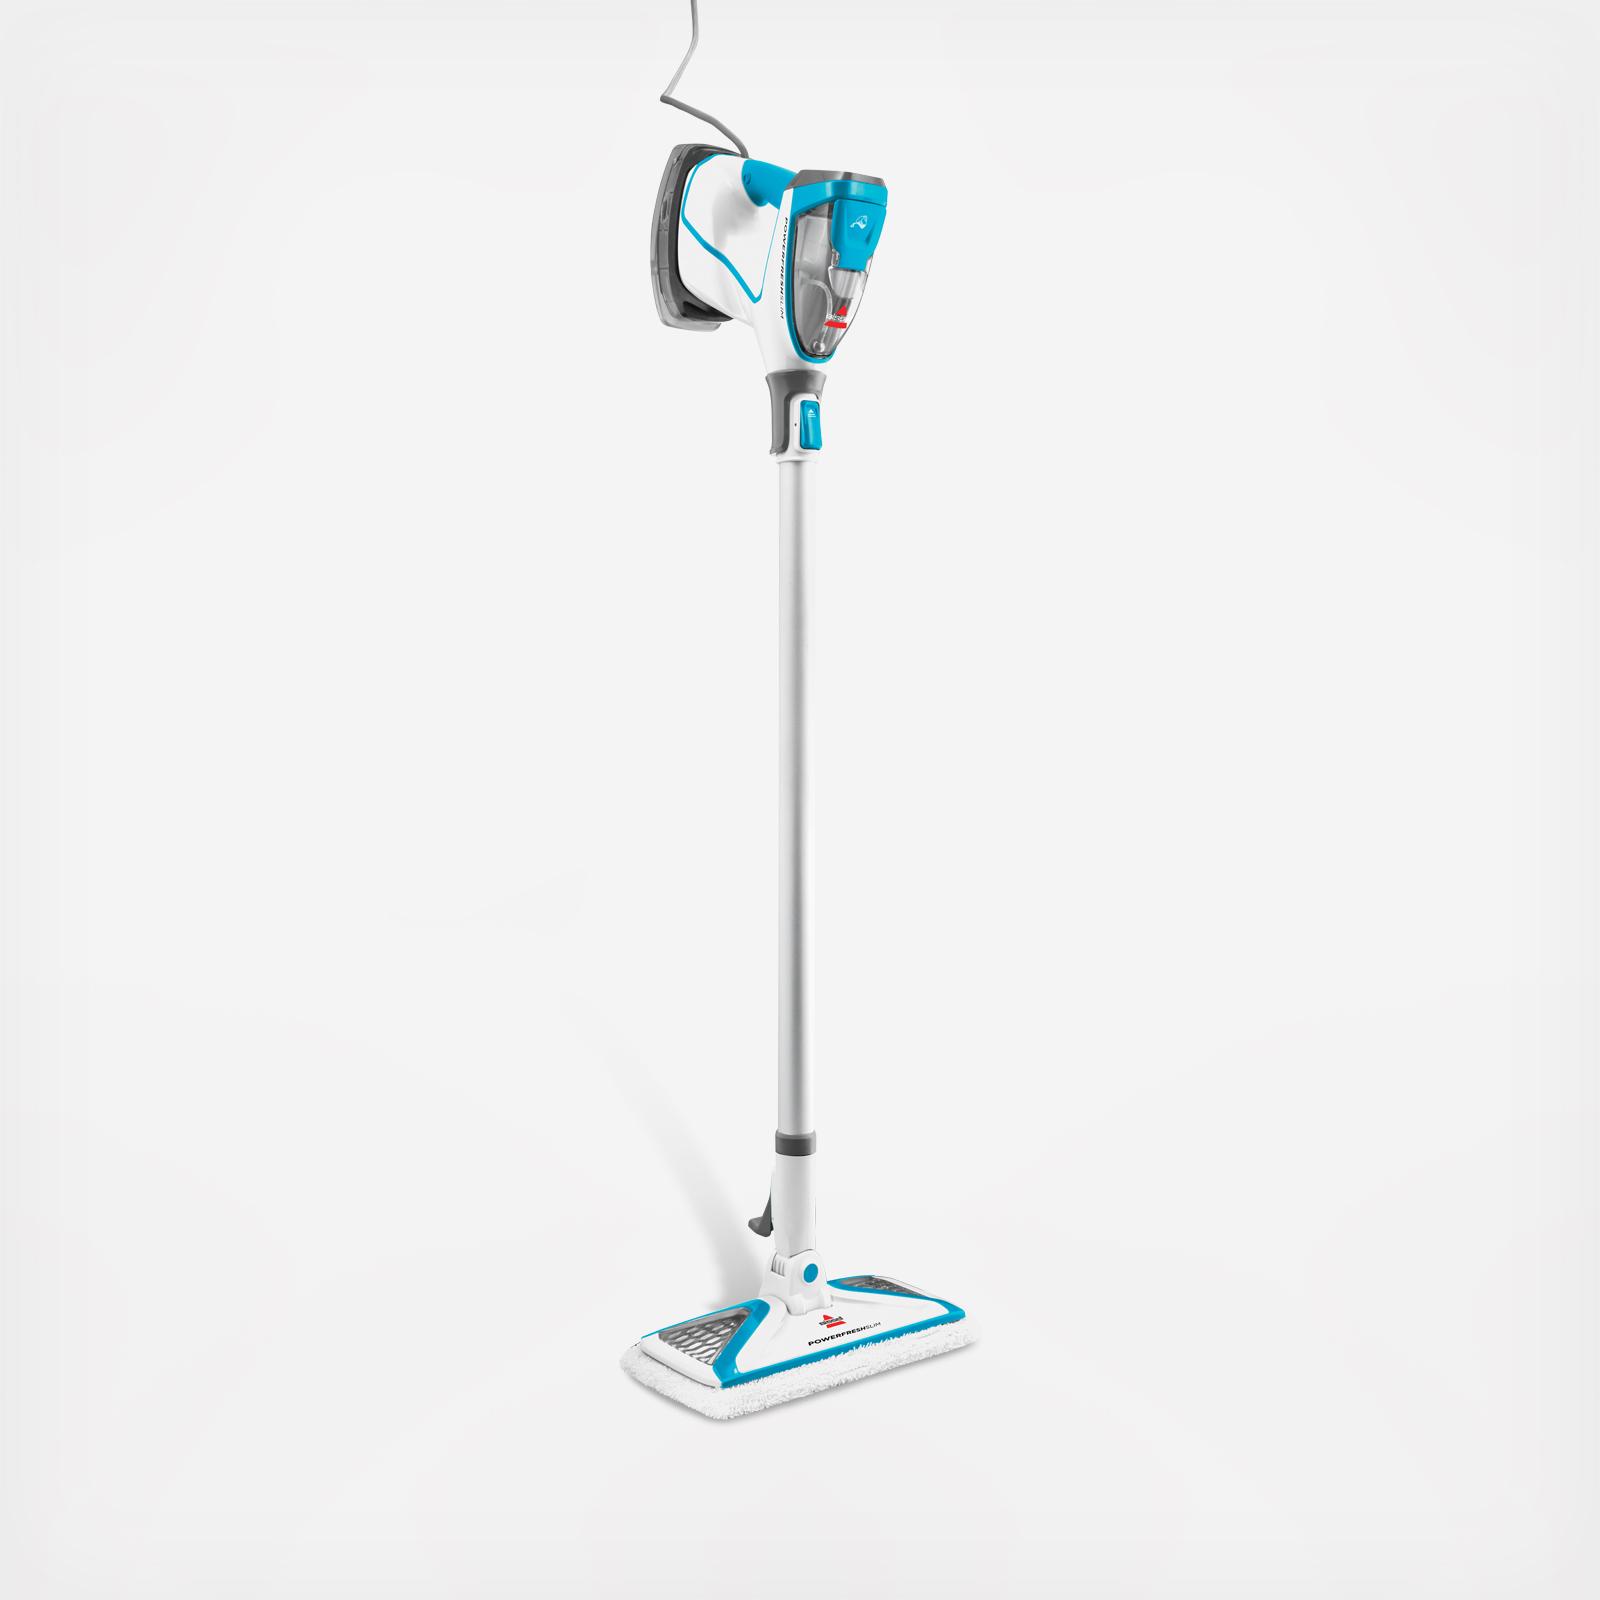  Steam and Go Steam Mop Floor Steamer with Handheld Steam  Cleaner for Tile and Grout, Hardwood Floors, Laminate, Glass, Fabric,  Upholstery, Garments, Metal, Carpet, Granite and Countertops